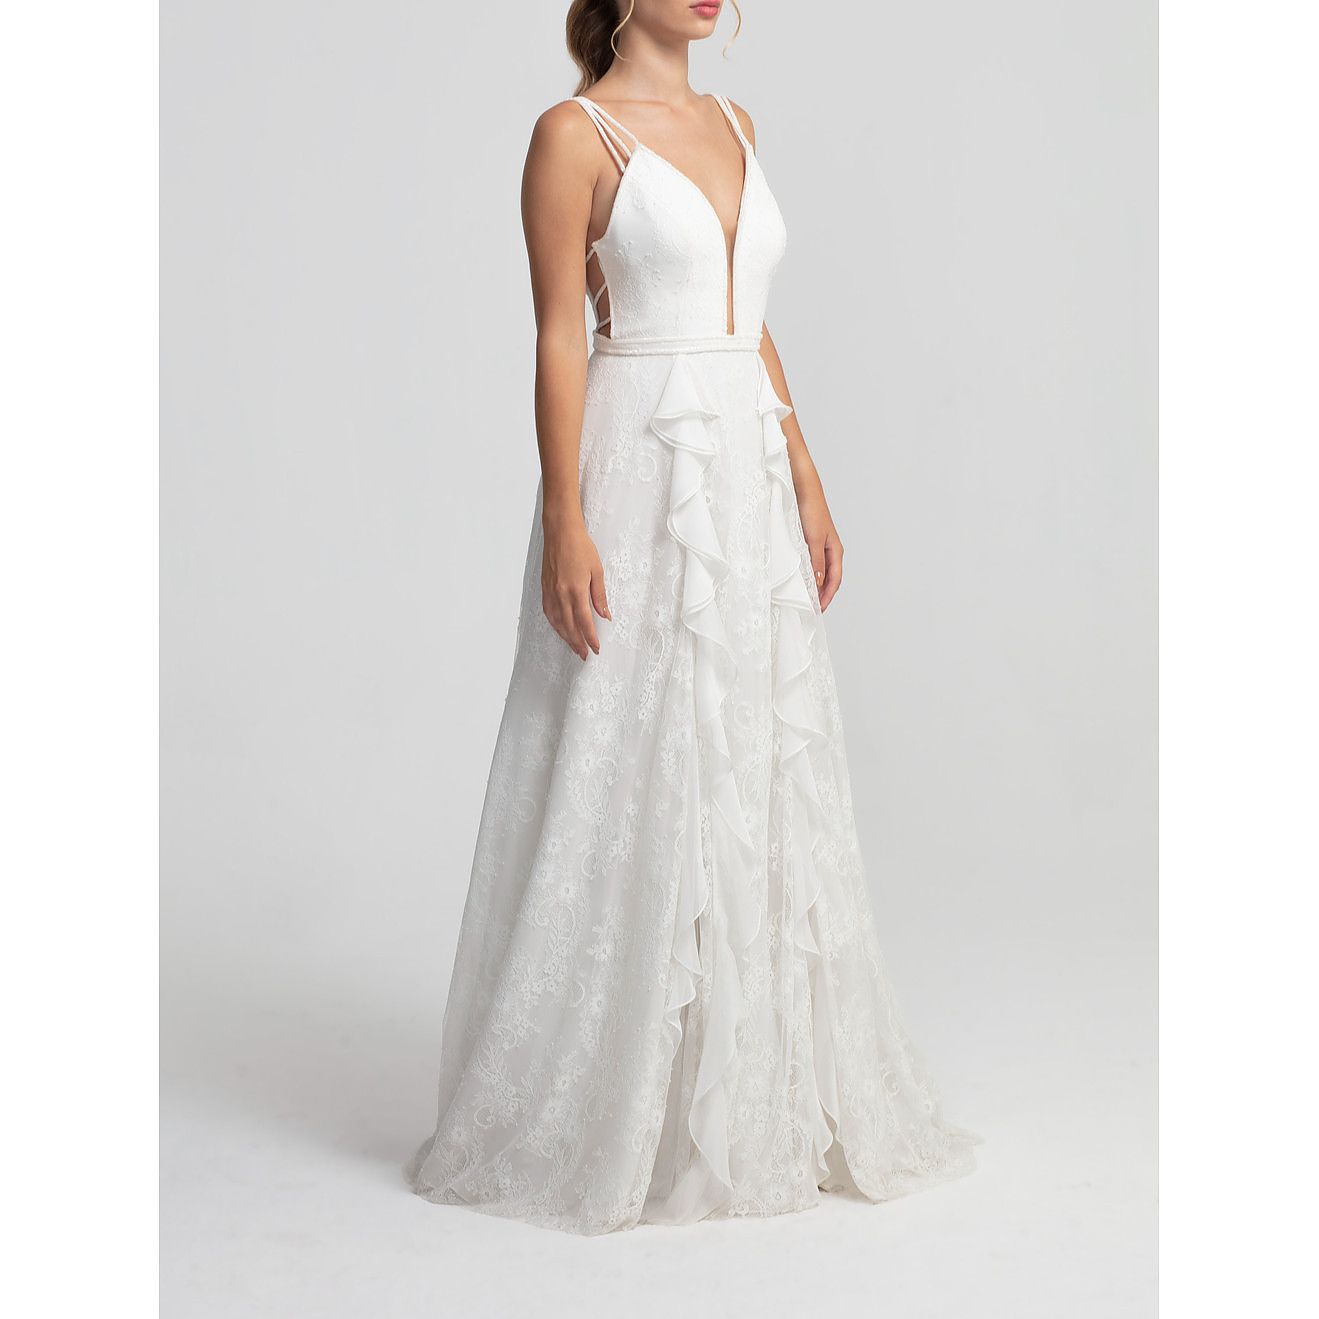 Barrus London French Lace Wedding Dress With Decollete Neck